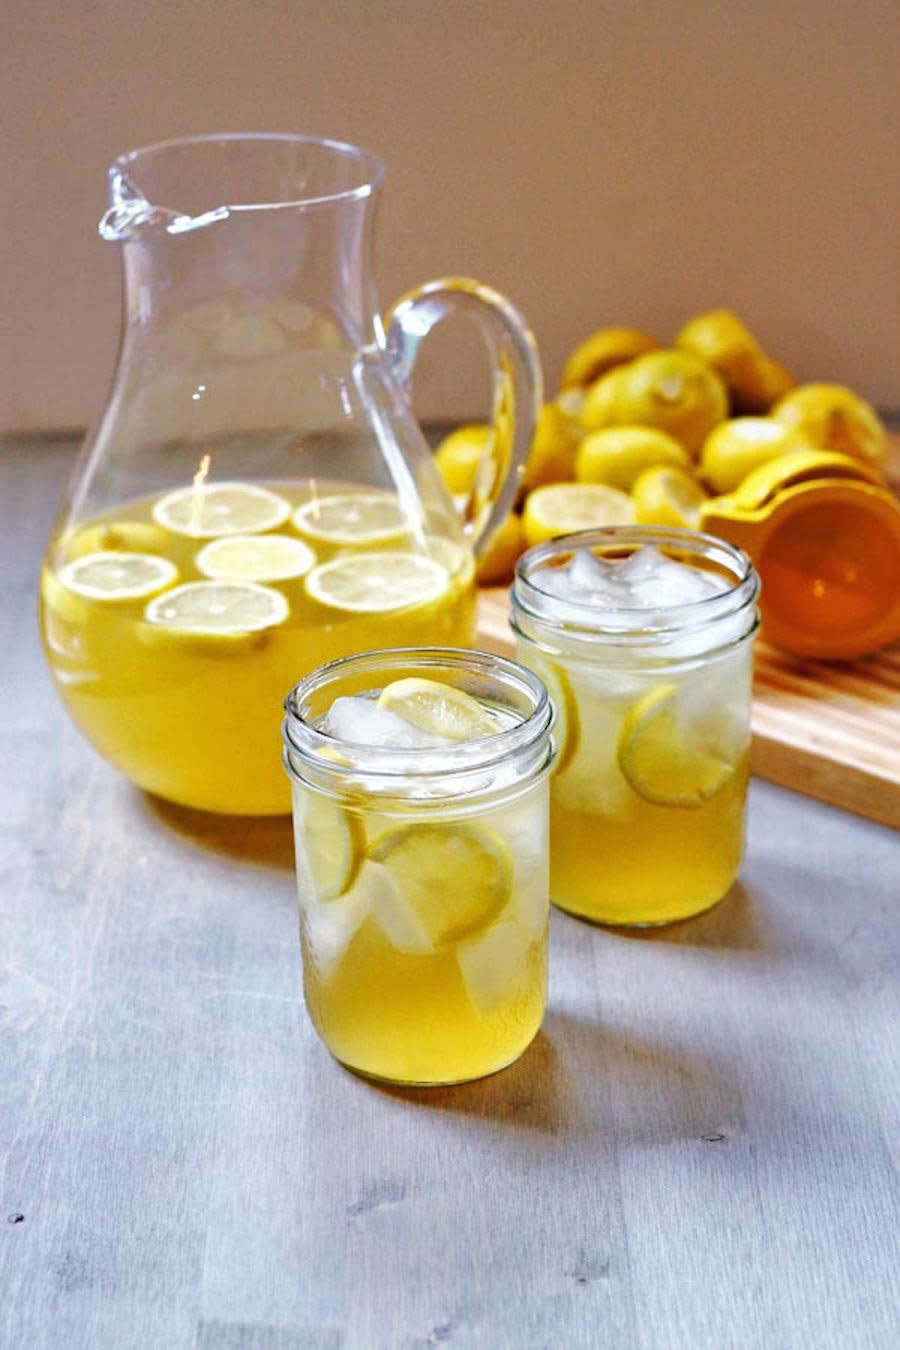 <strong>Get the <a href="http://cookswithcocktails.com/whiskey-with-homemade-lemonade-a-k-a-redneck-lemonade/" target="_blank">Whiskey With Homemade Lemonade recipe </a>from Cooks With Cocktails</strong>